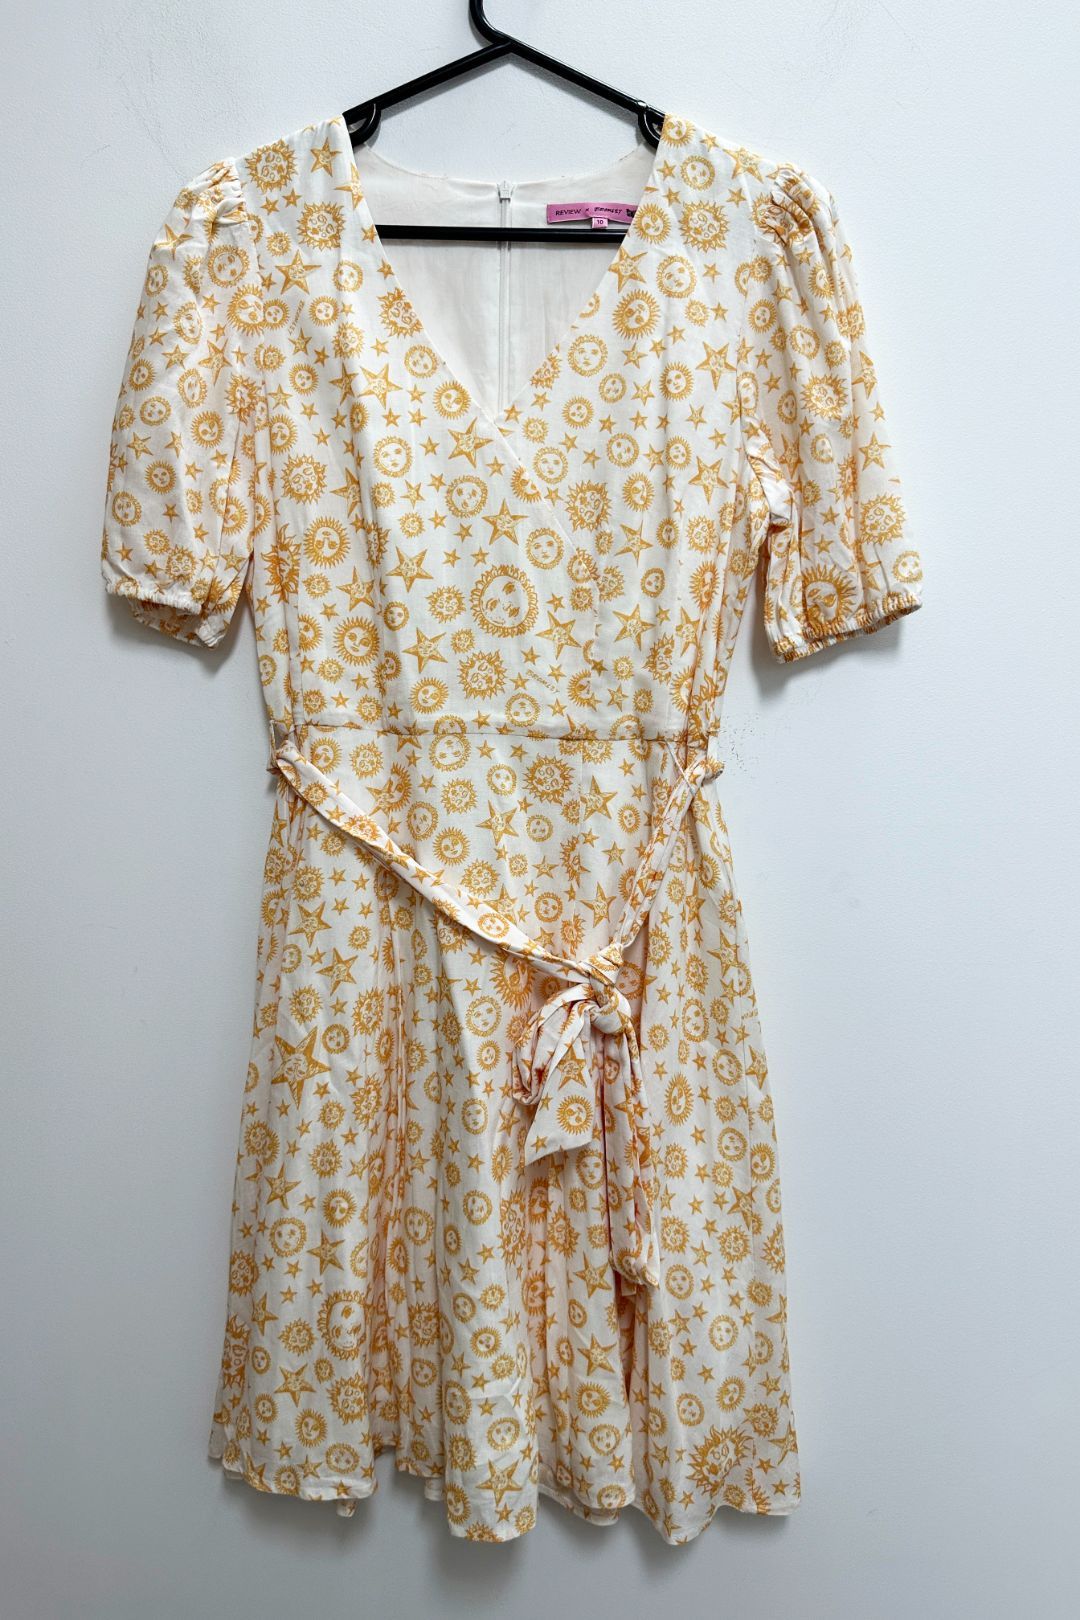 Review Sundazed Dress in Ivory and Gold